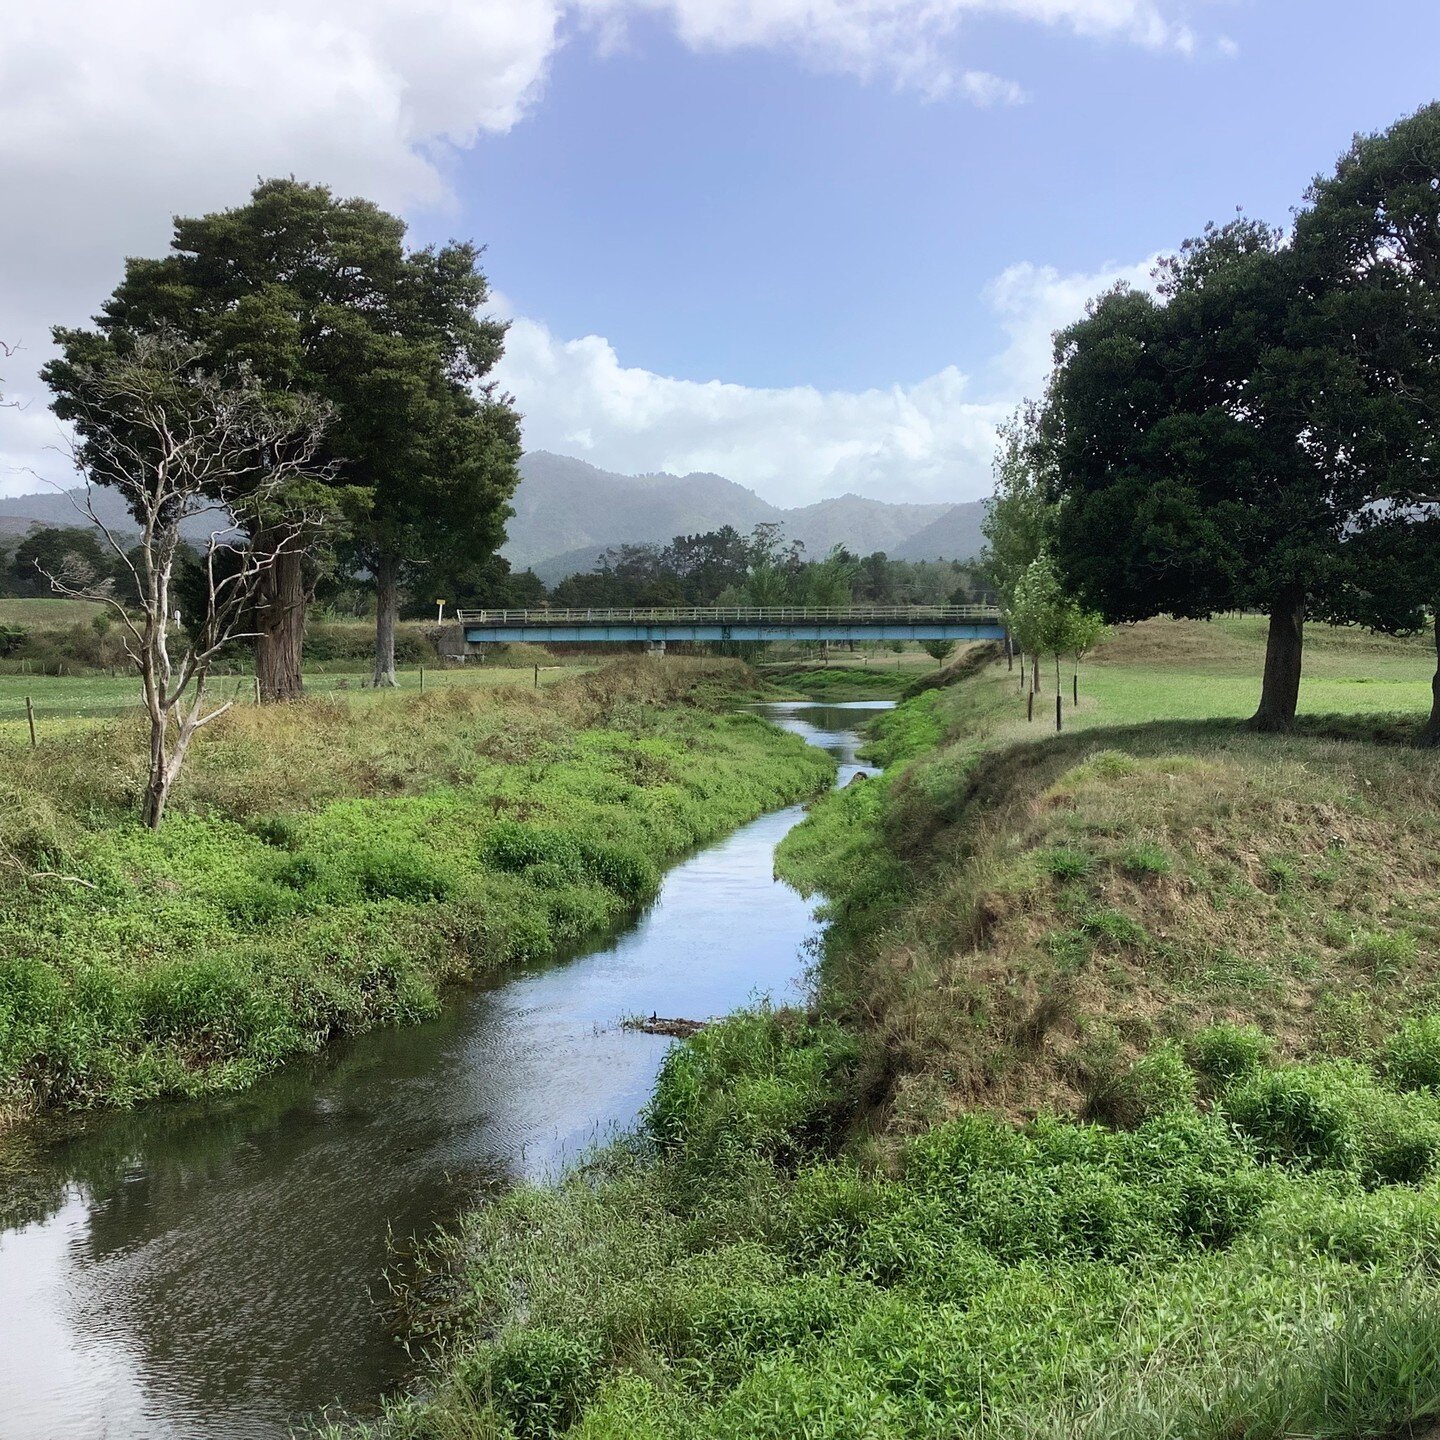 For decades since deforestation of this valley, cows and sheep have depended on access to this river for quenching their thirst. Meanwhile sediment has bled from the land, and the harbour/kaimoana has suffered at our hands. However, with some good pl